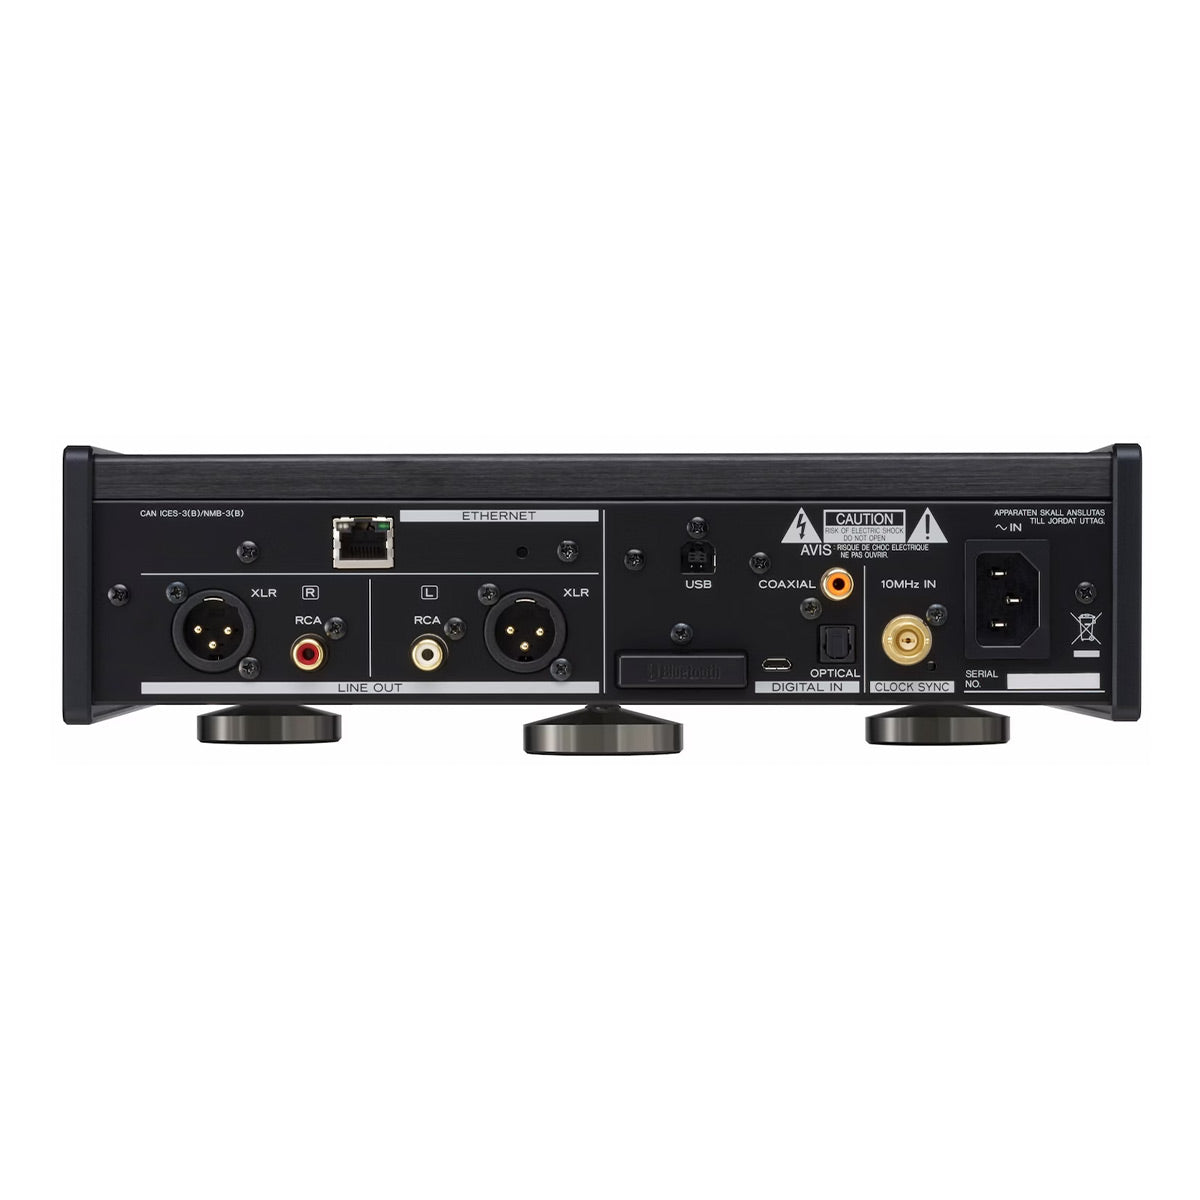 TEAC NT-505-X USB DAC and Network Player with Built-In Preamplifier